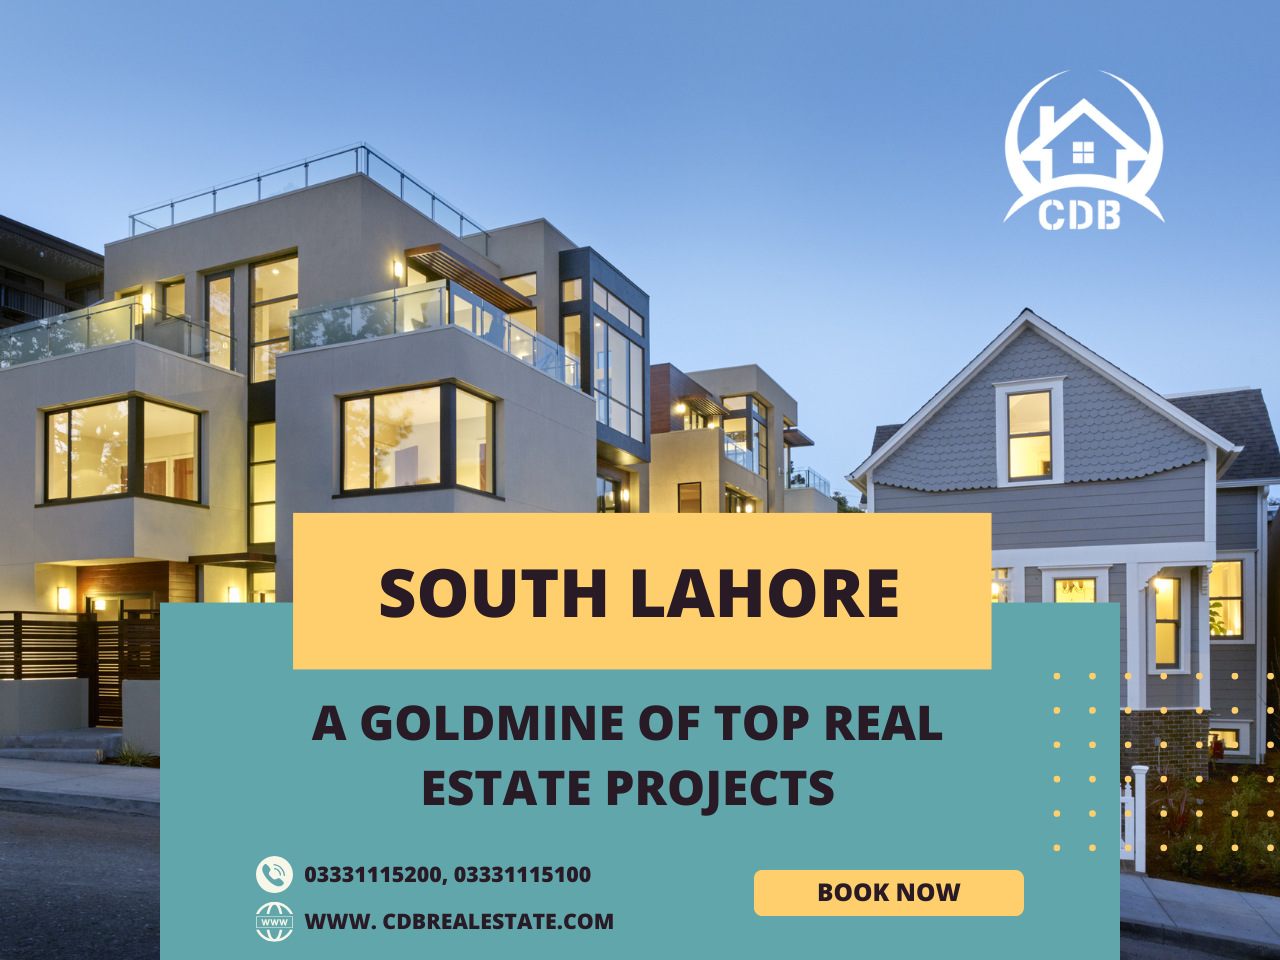 South Lahore: A Goldmine of Top Real Estate Projects